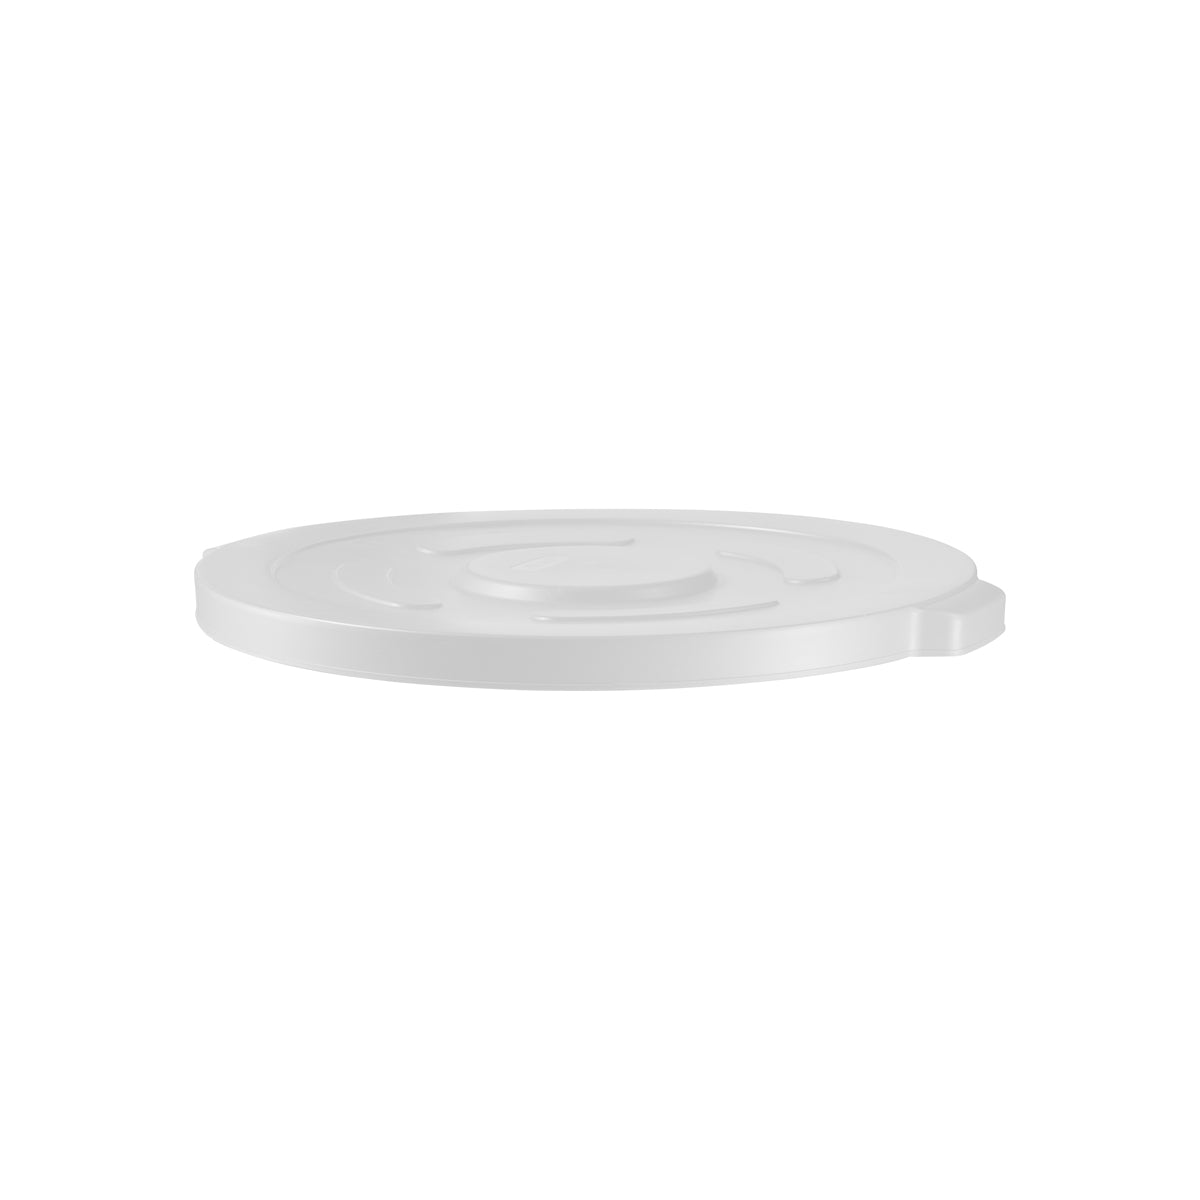 JW-CRC1P (WHITE) Jiwins Lid to Suit 37.85Lt Round Ingredient Container Tomkin Australia Hospitality Supplies